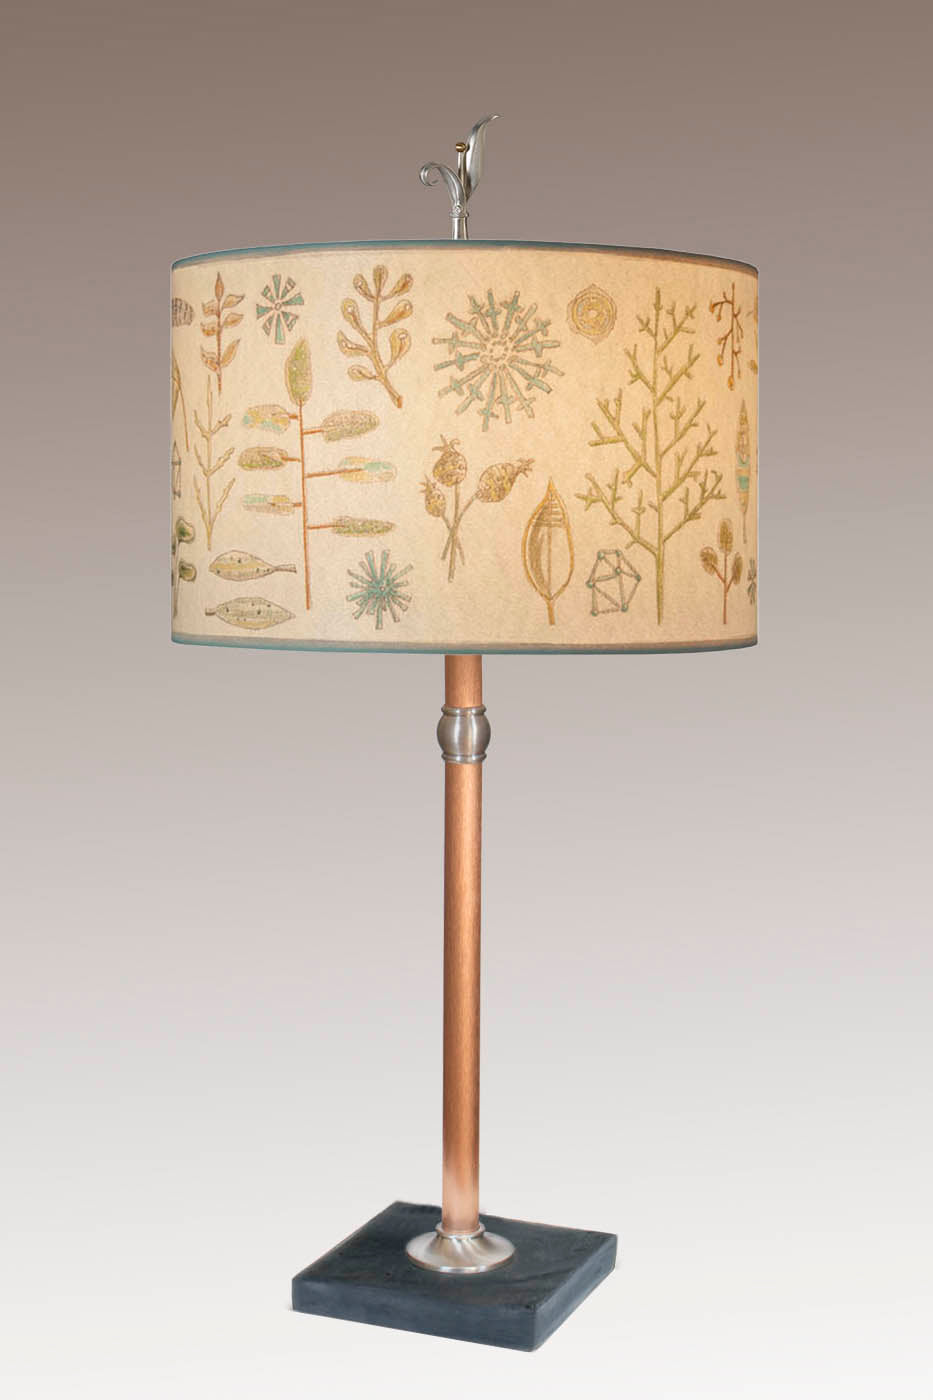 Janna Ugone & Co Table Lamp Copper Table Lamp with Large Drum Shade in Field Chart